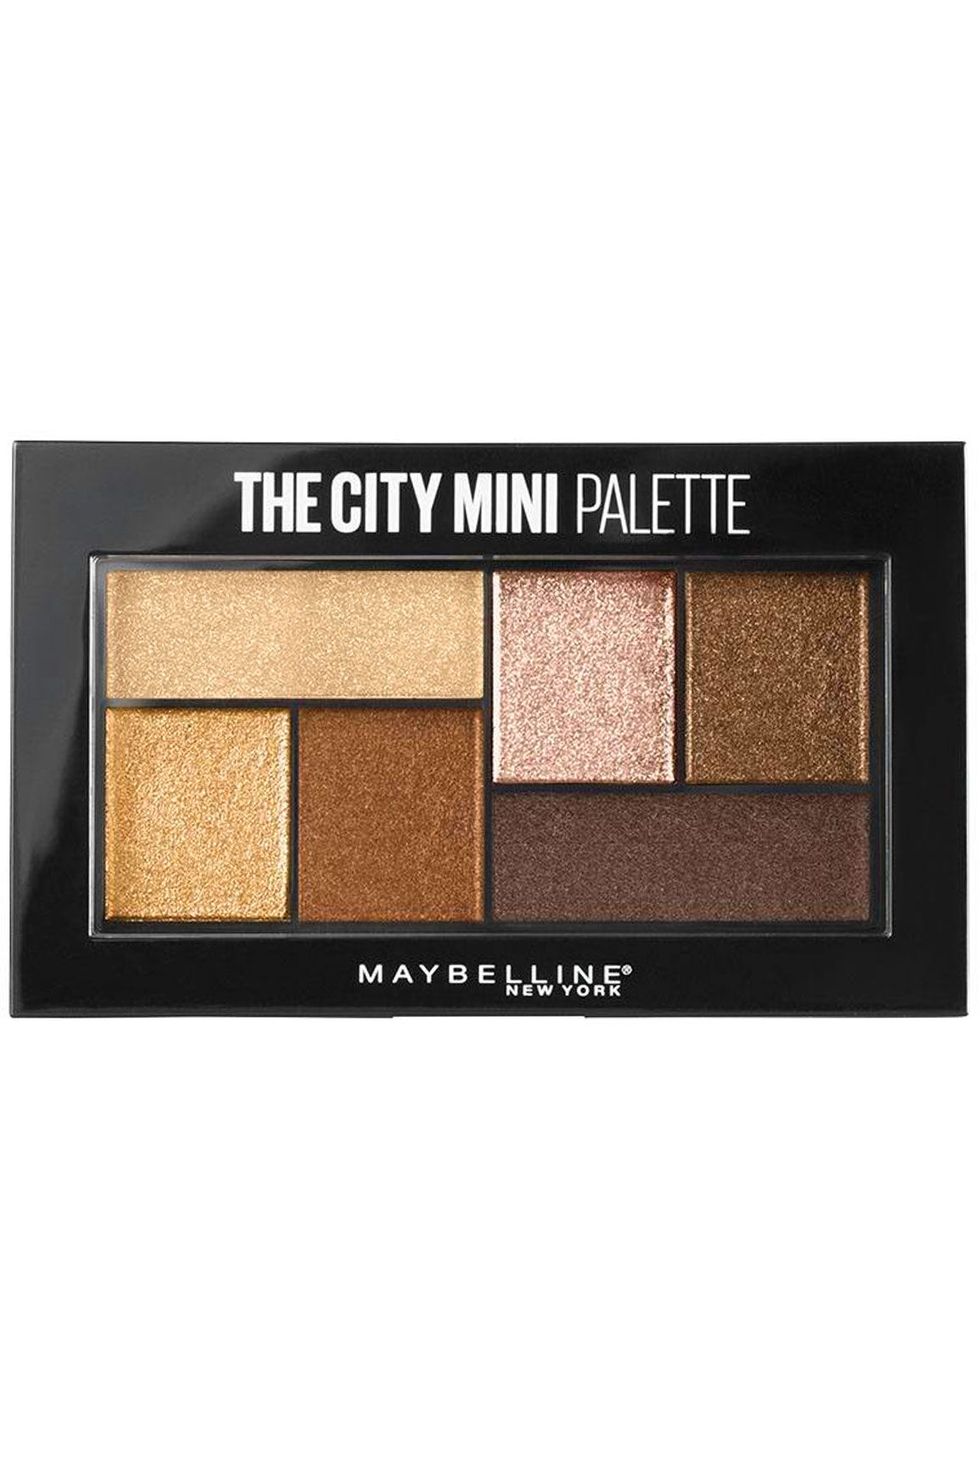 Maybelline The City Mini Palette Rooftop Bronzes